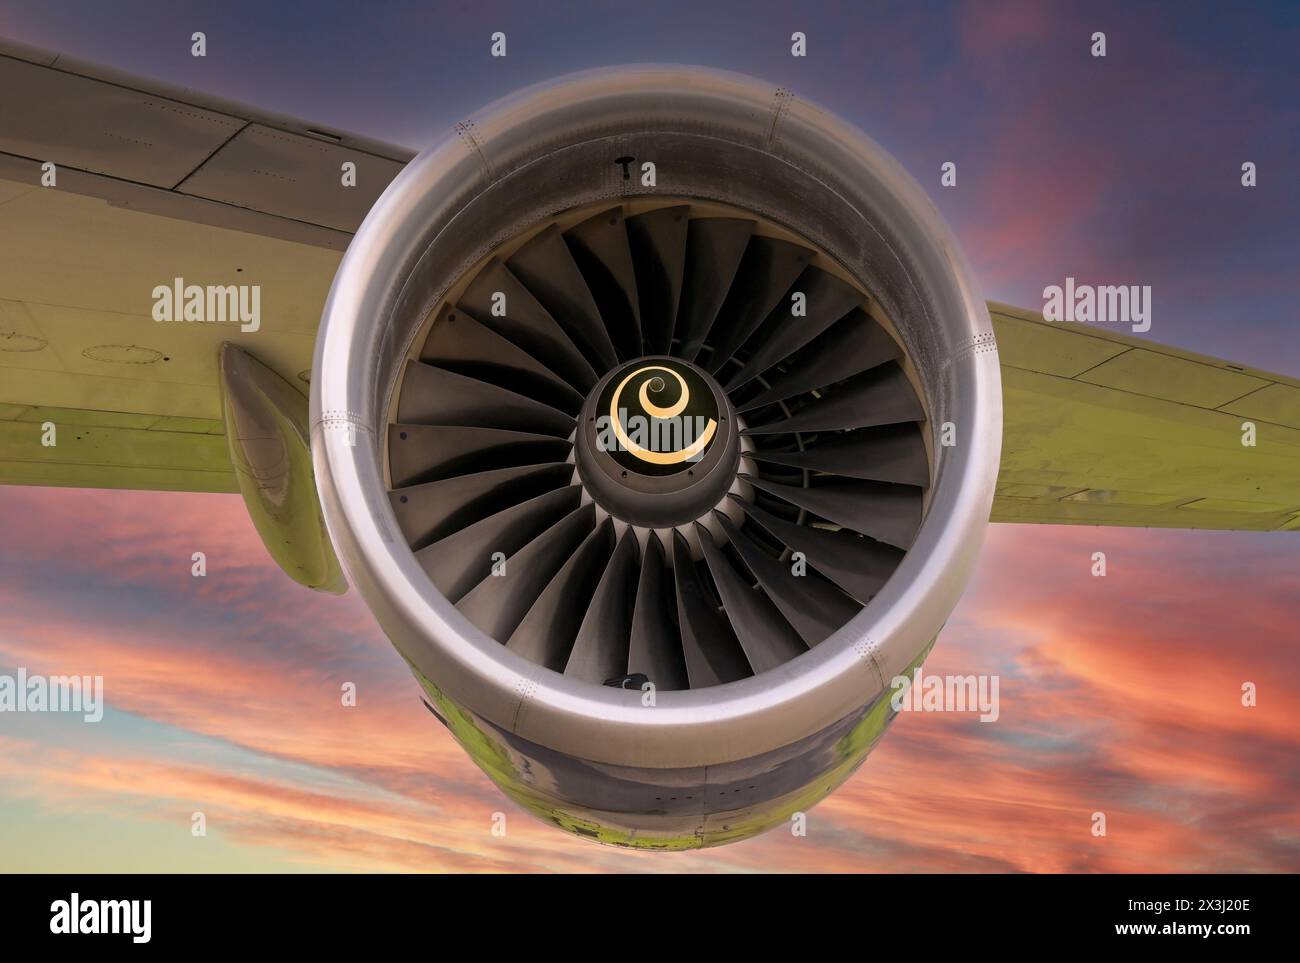 Close up view of a turbofan jet engine on an aircraft wing isolated against a colourful sunset sky. Travel concept. Stock Photo